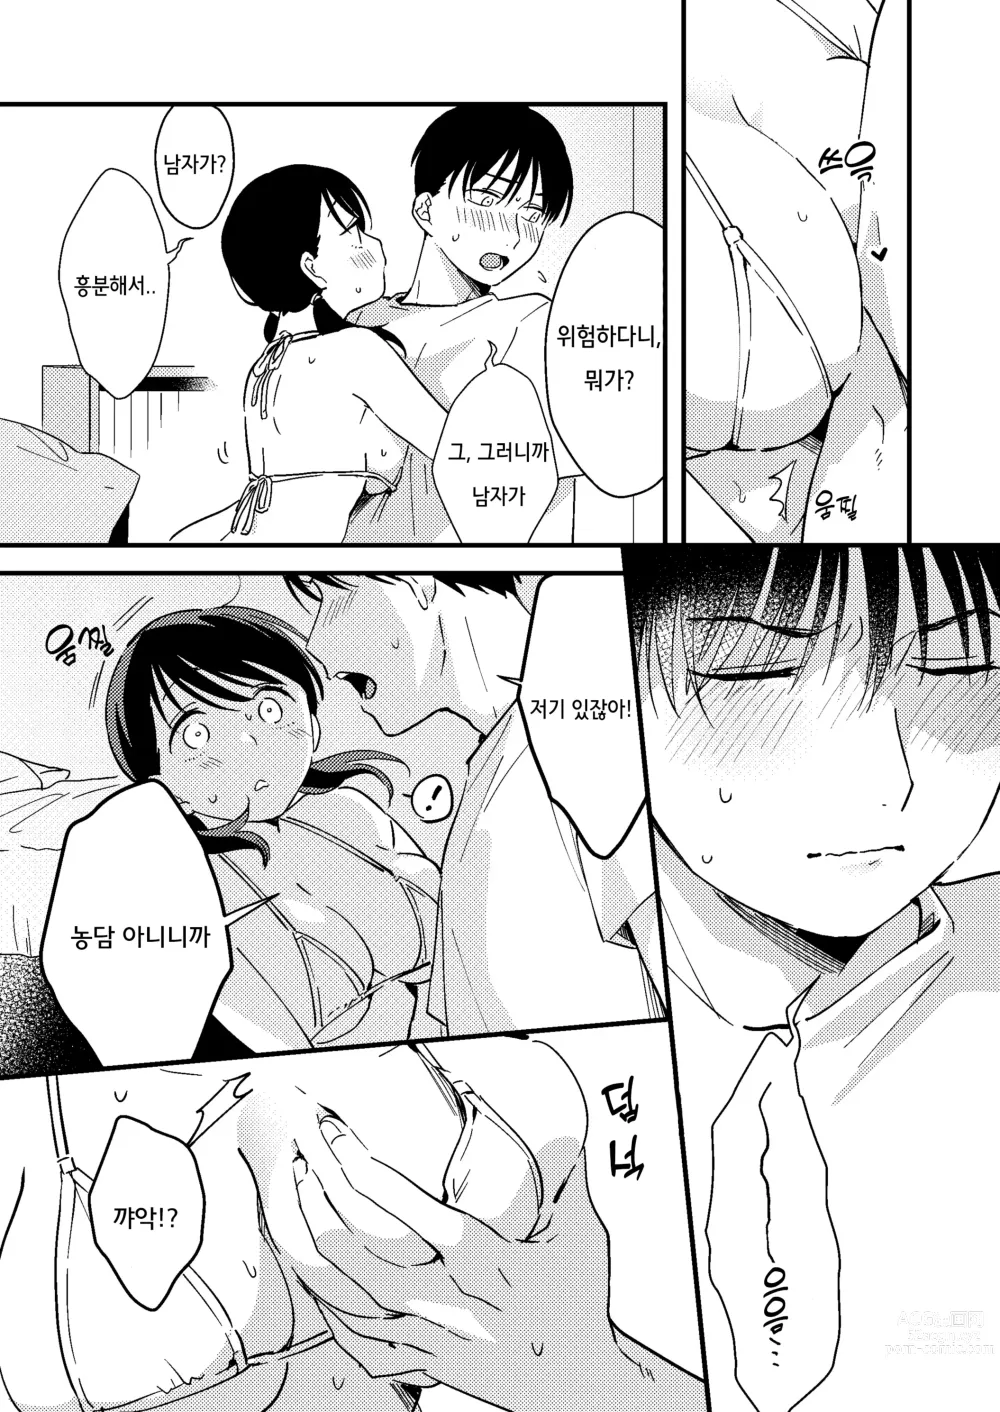 Page 7 of doujinshi 핑계 대는 여 자친구